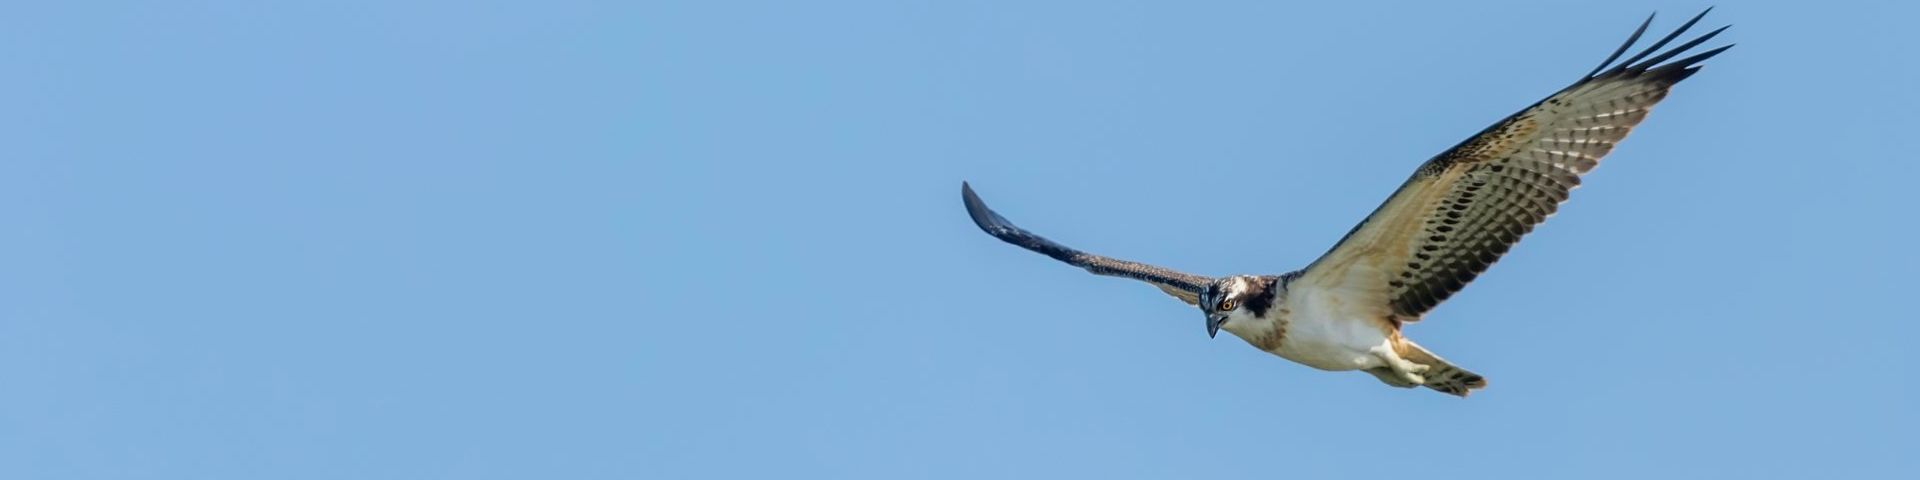 To the right of the image, an osprey flies, wings outstretched, against a plain light blue sky.